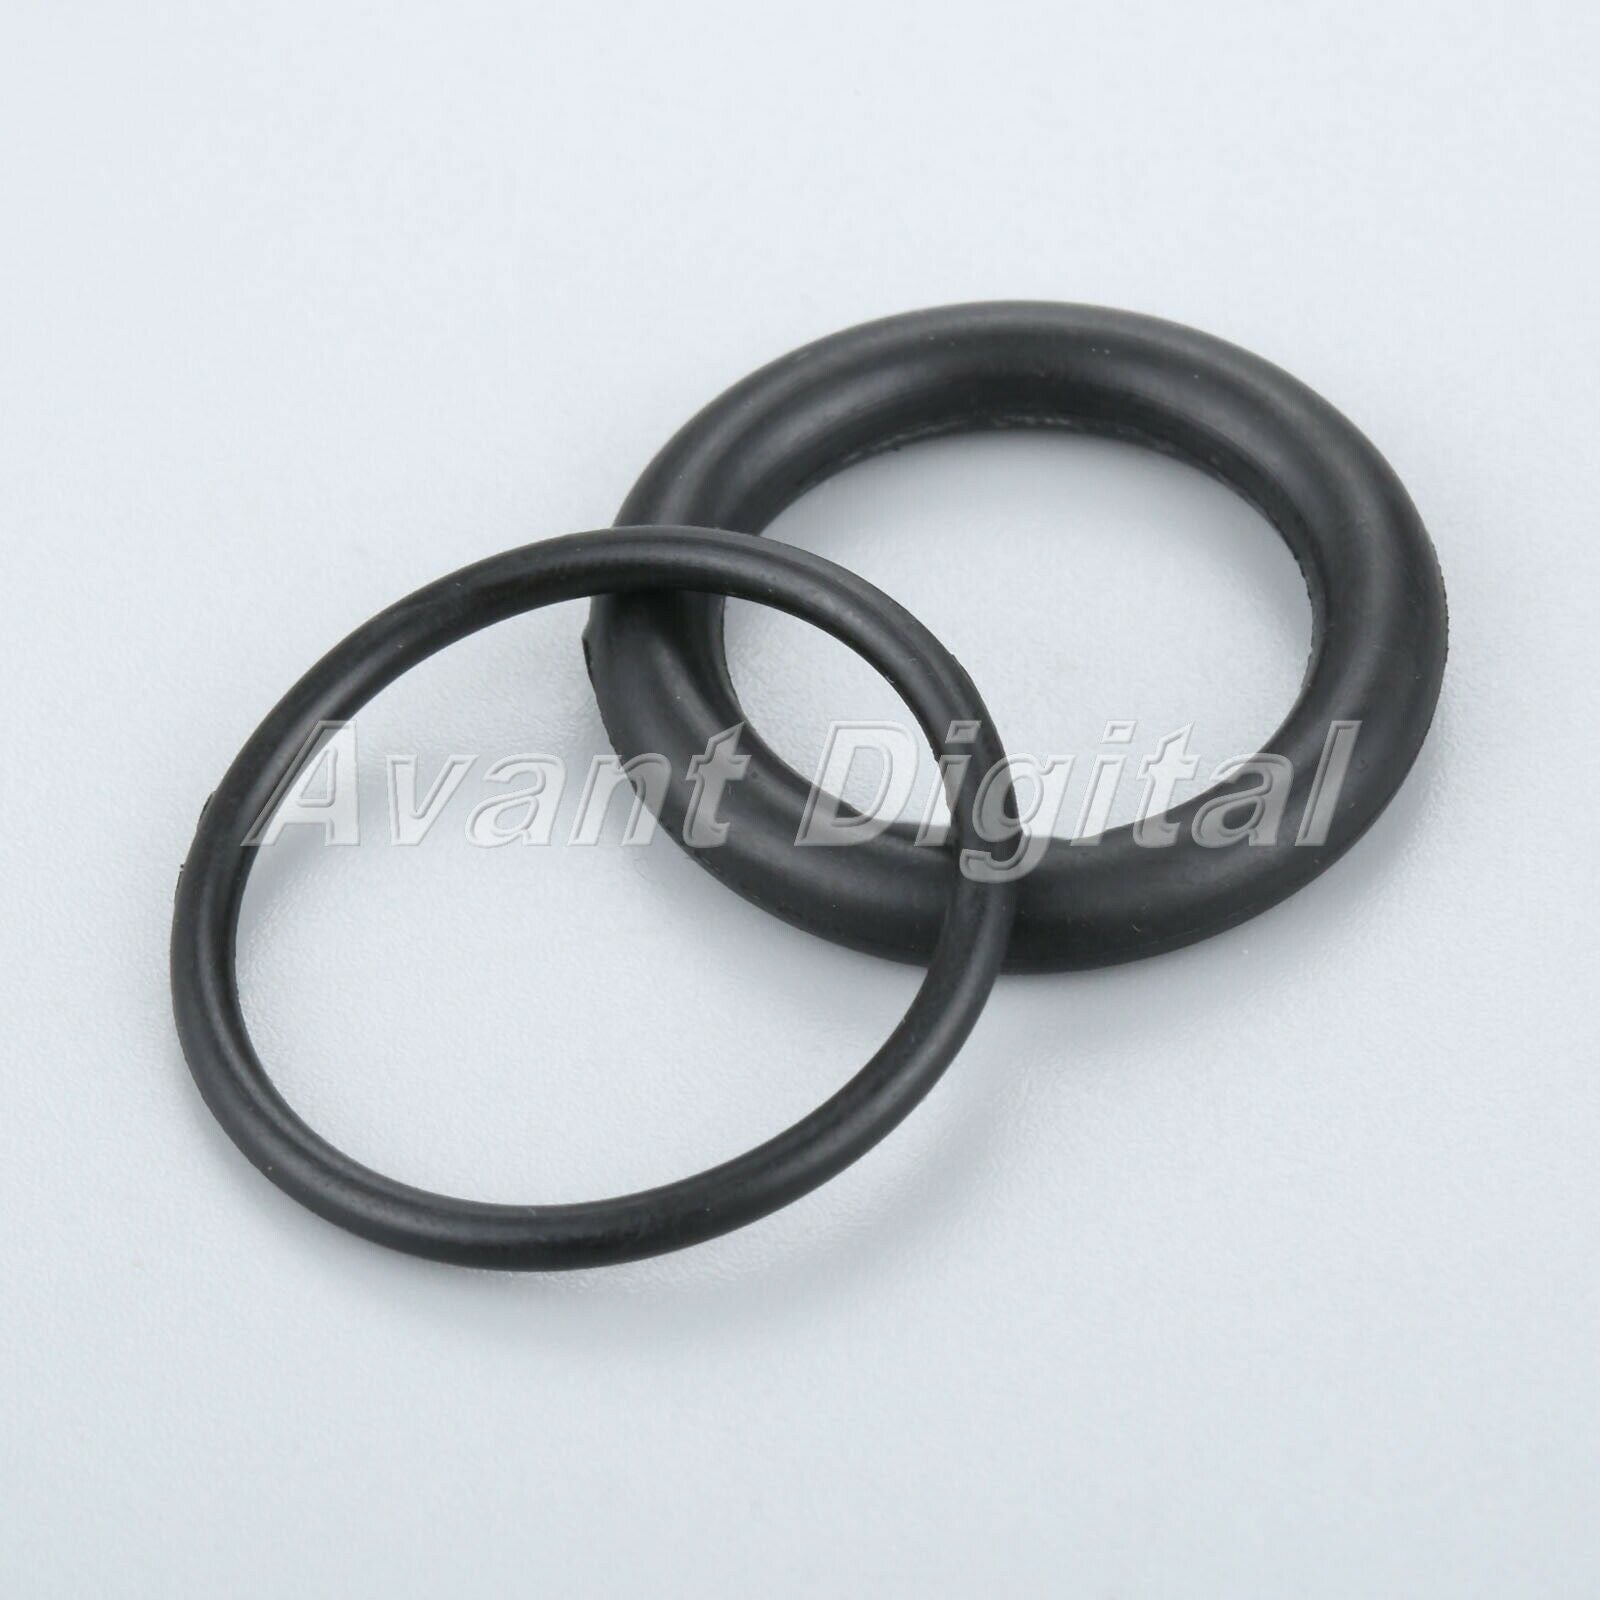 225Pcs Assorted Sizes Rubber O-Ring Set For Plumbing Tap Seal Sink Seal Thread